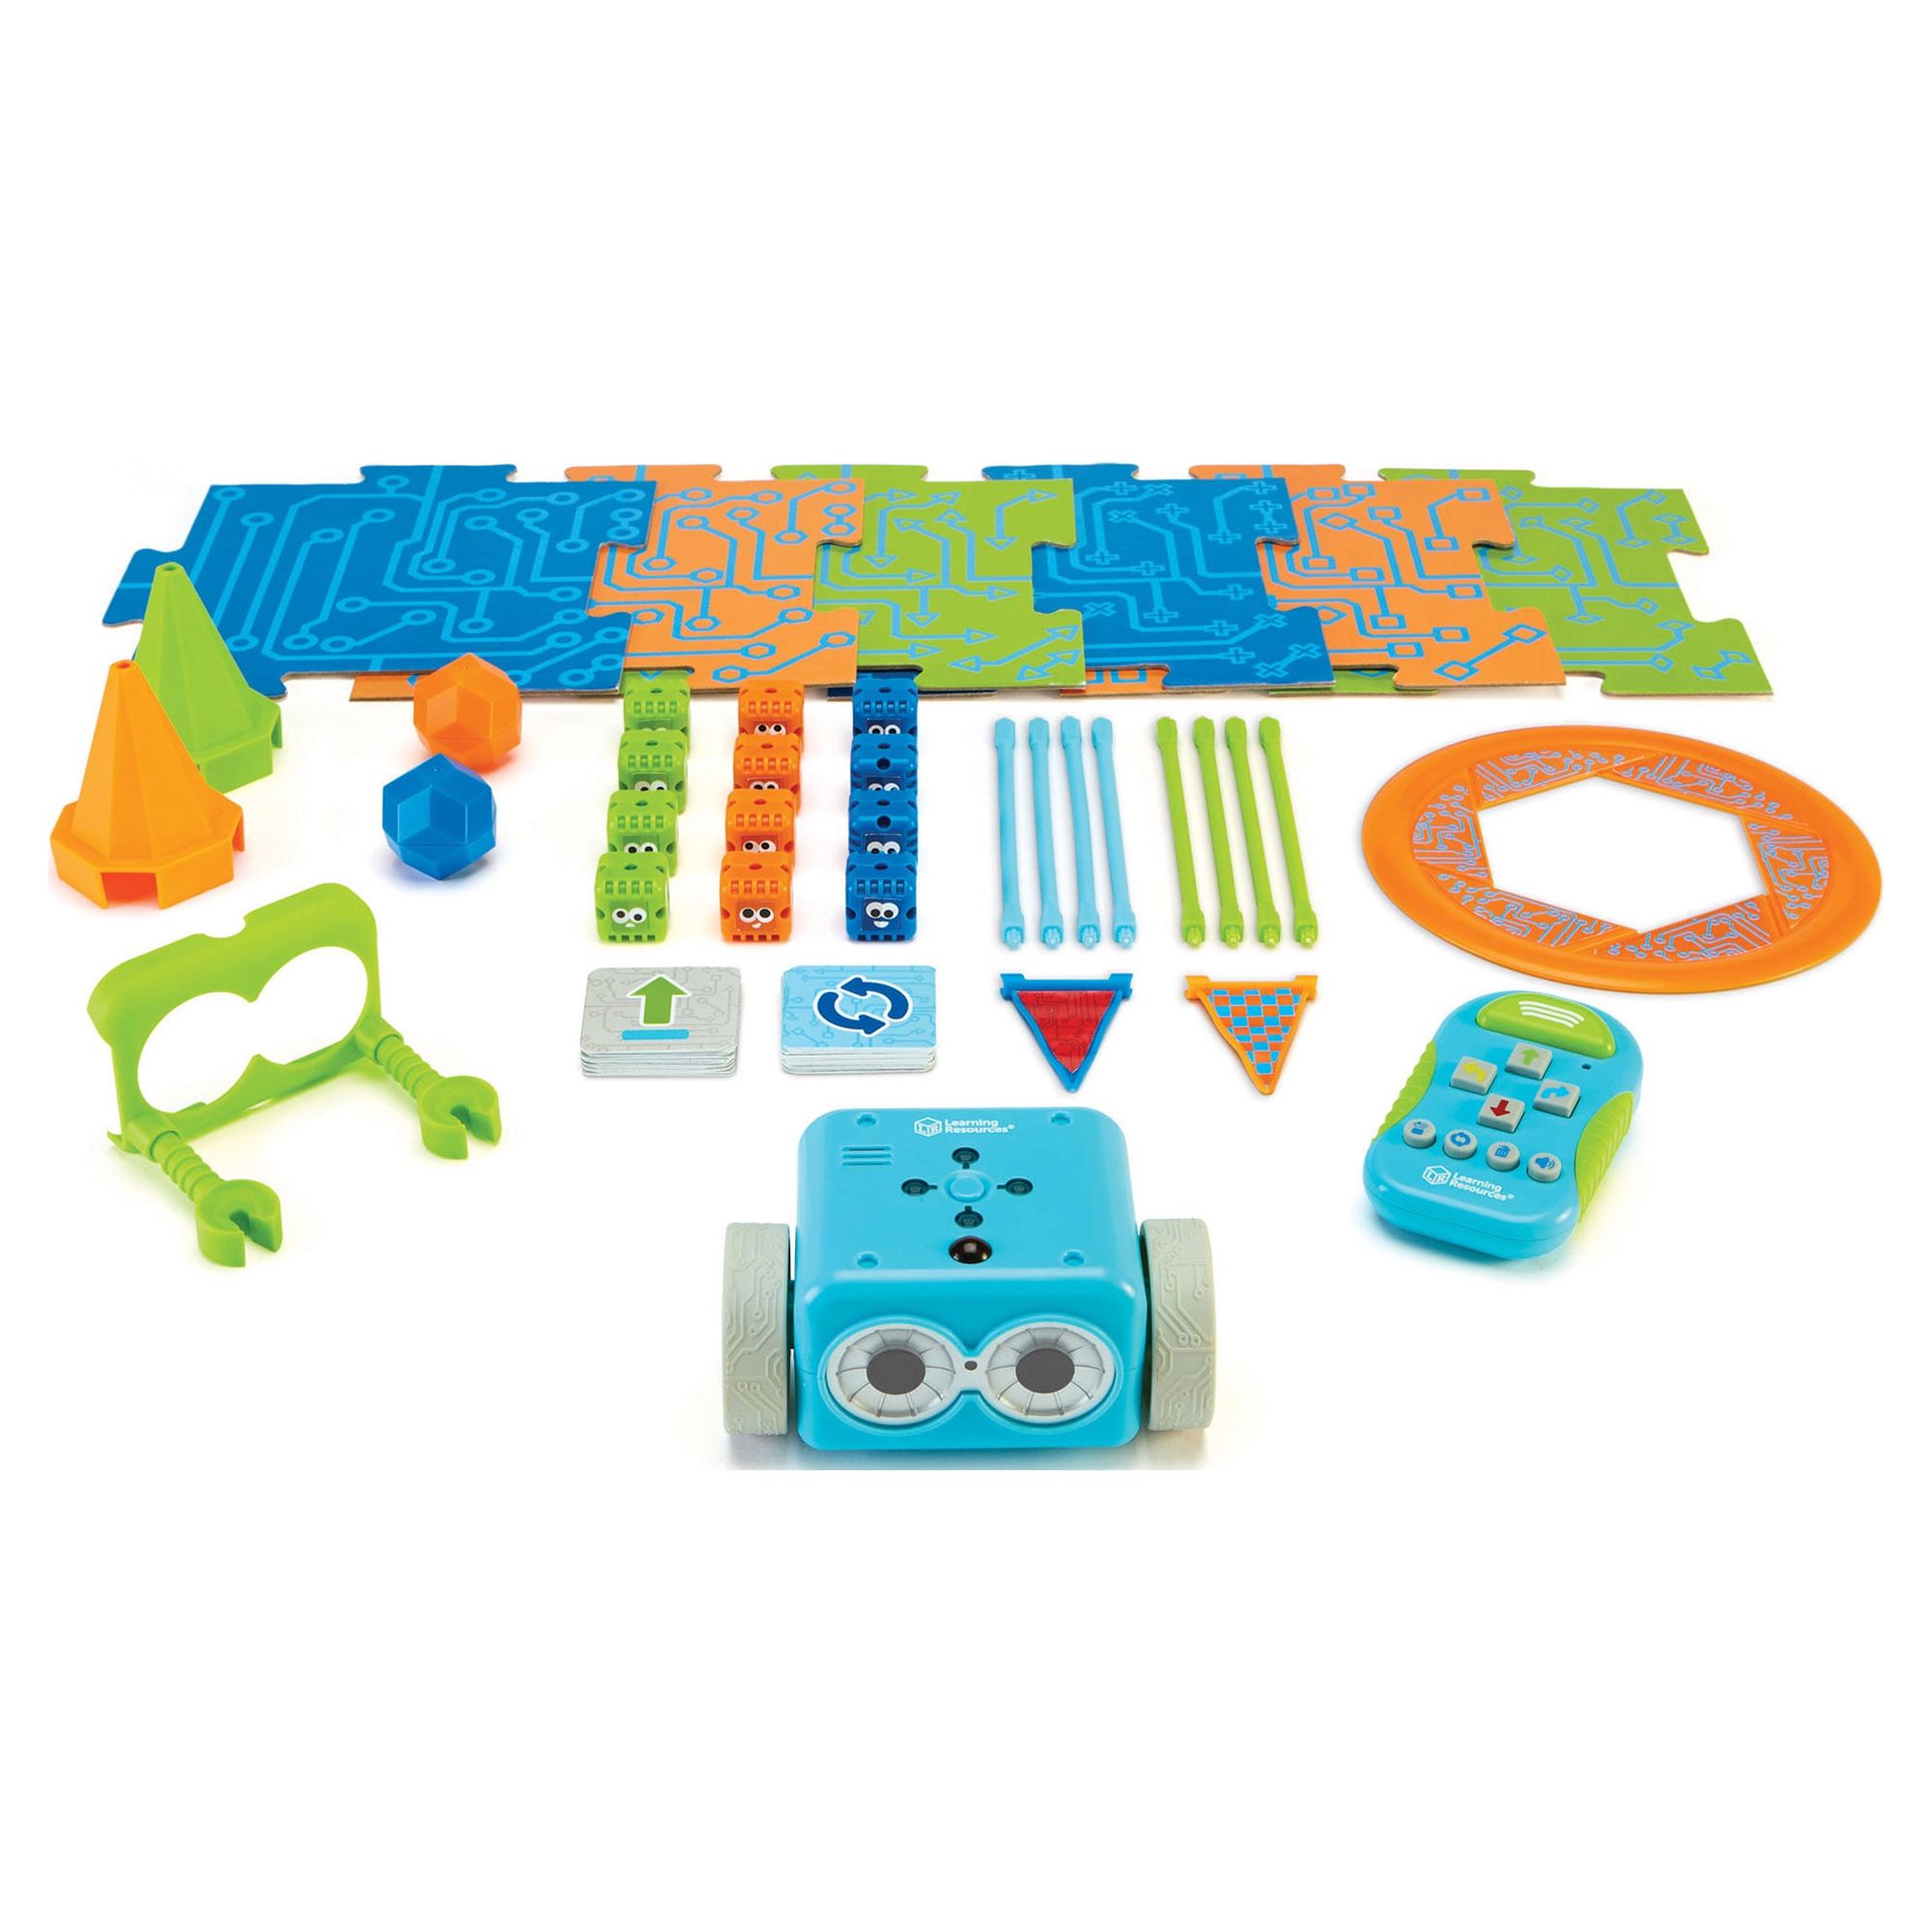 Botley the Coding Robot Activity Set - image 3 of 13